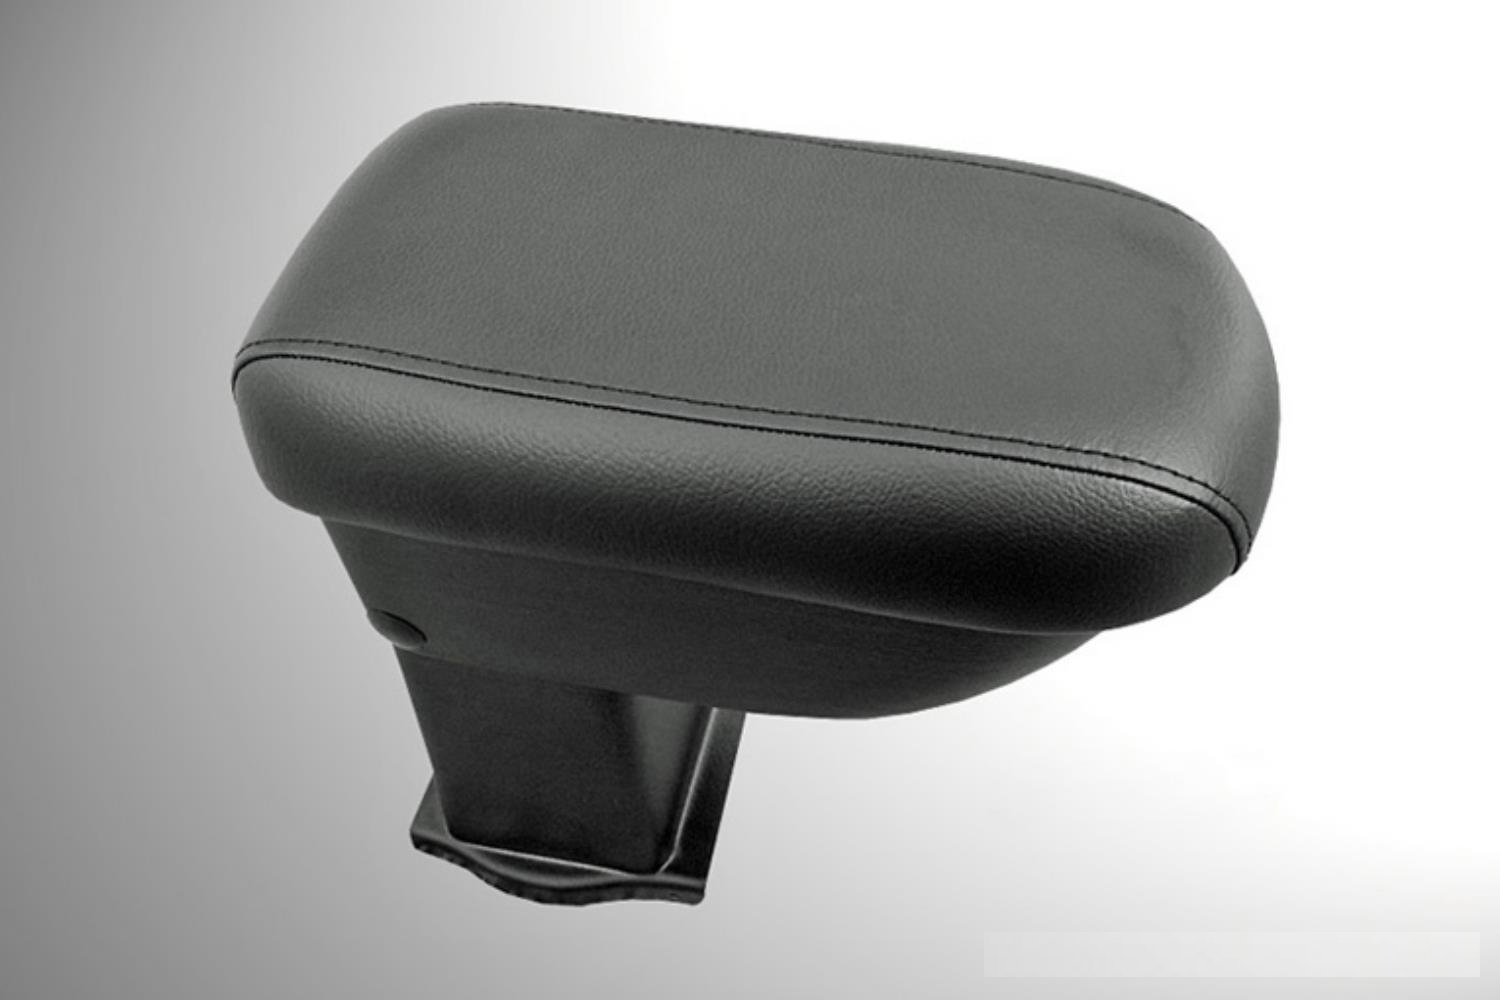 Suzuki Jimny Gen 3 owners also need the finer things in life. The Jimny Gen  3 armrest provides great comfort and convenience for passenger…